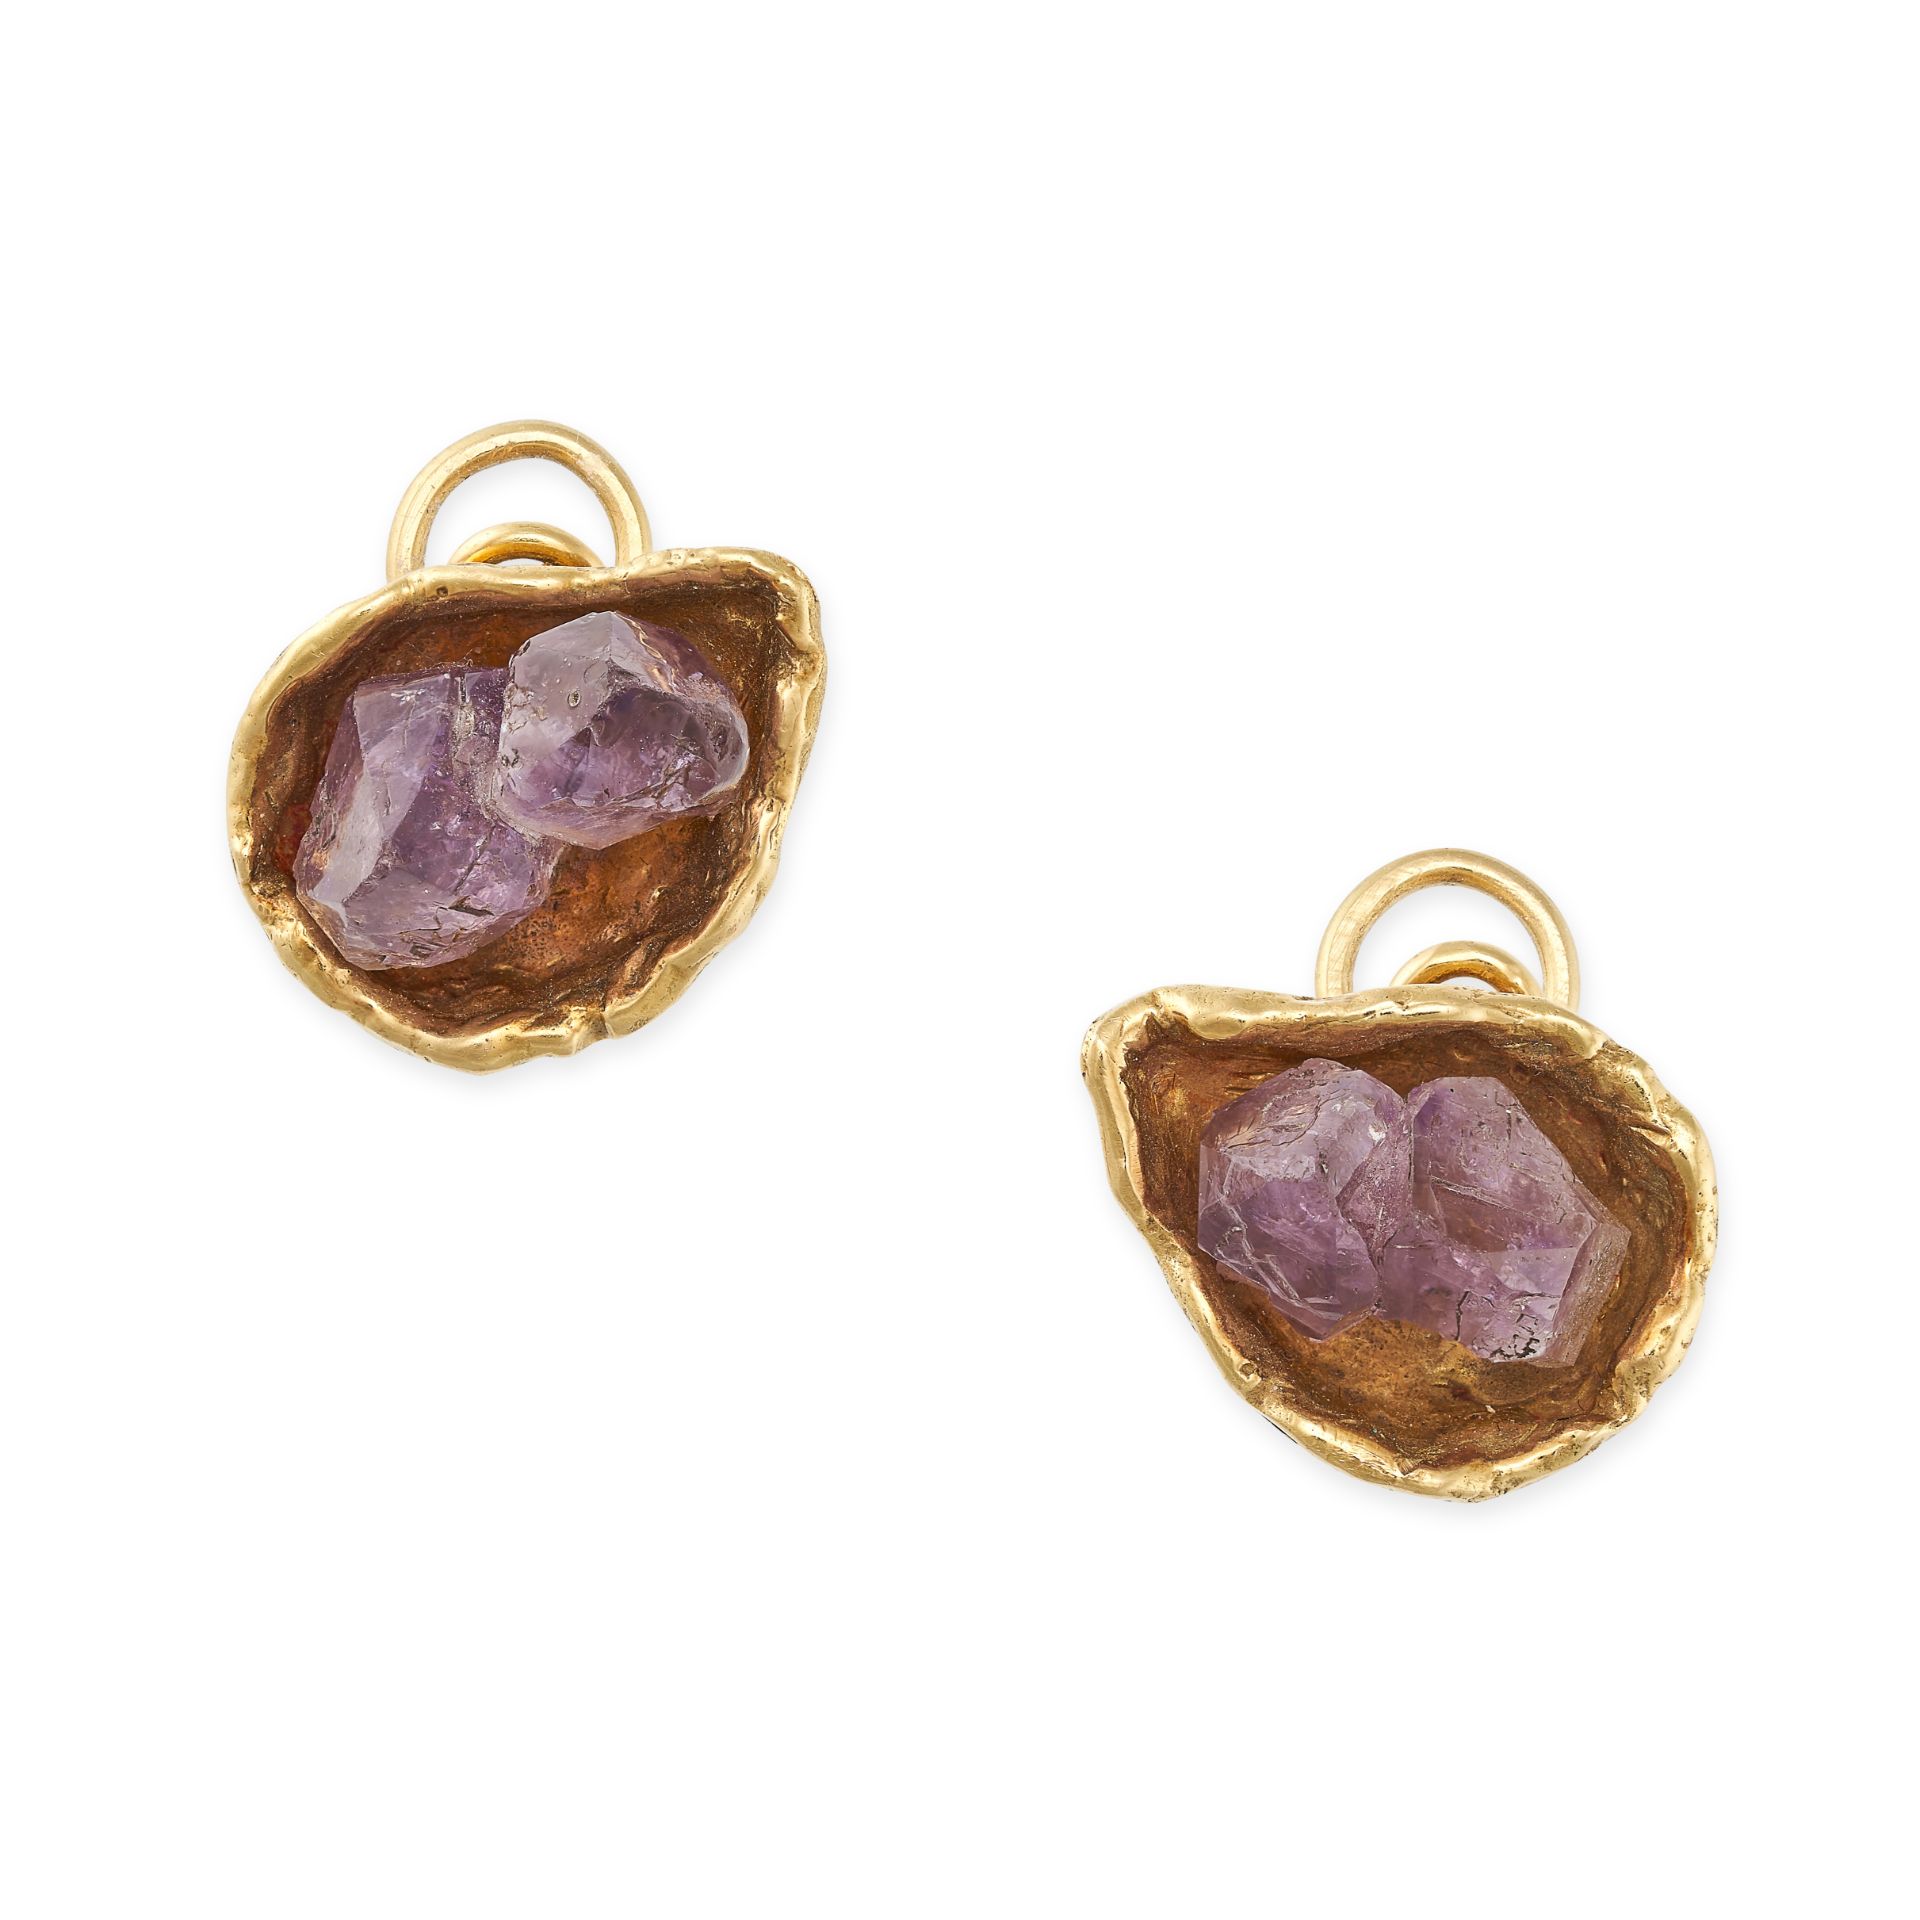 JOHN DONALD, A PAIR OF AMETHYST CLIP EARRINGS in 18ct yellow gold, each set with a rough amethyst...